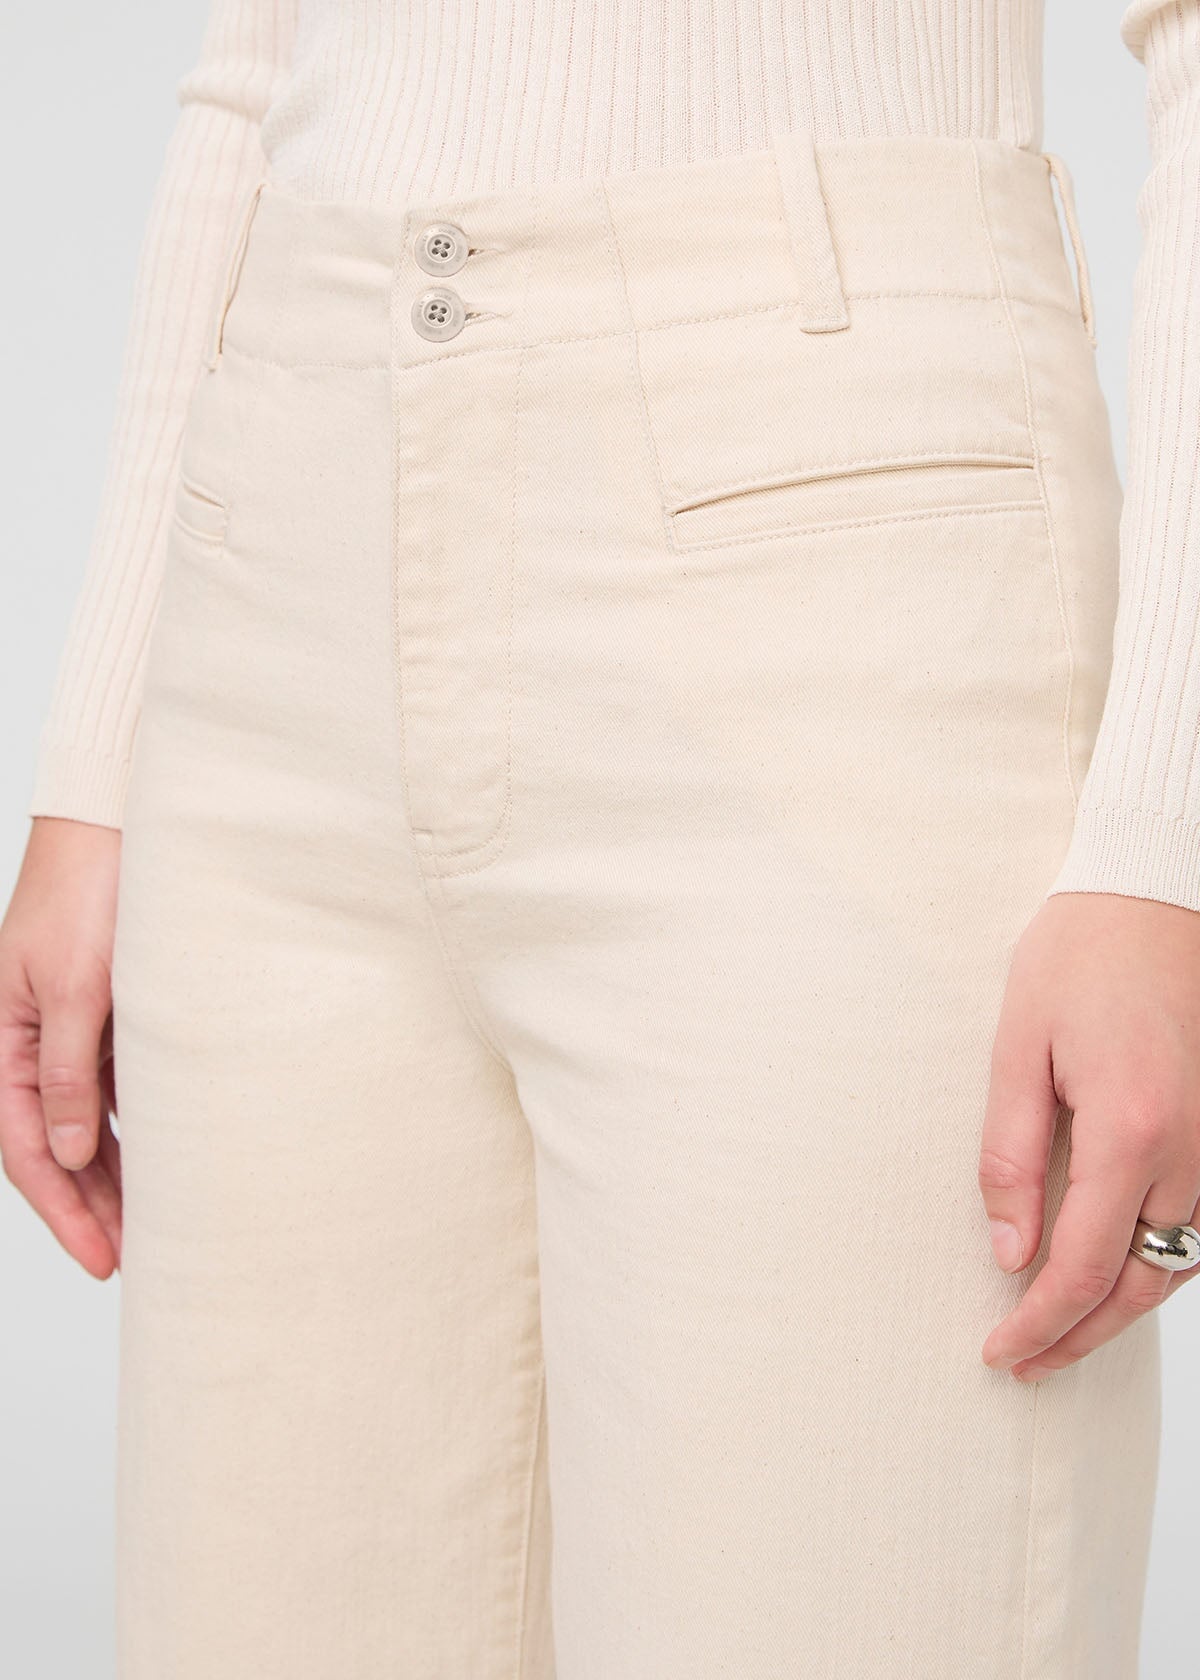 womens off-white high rise trouser front waistband detail